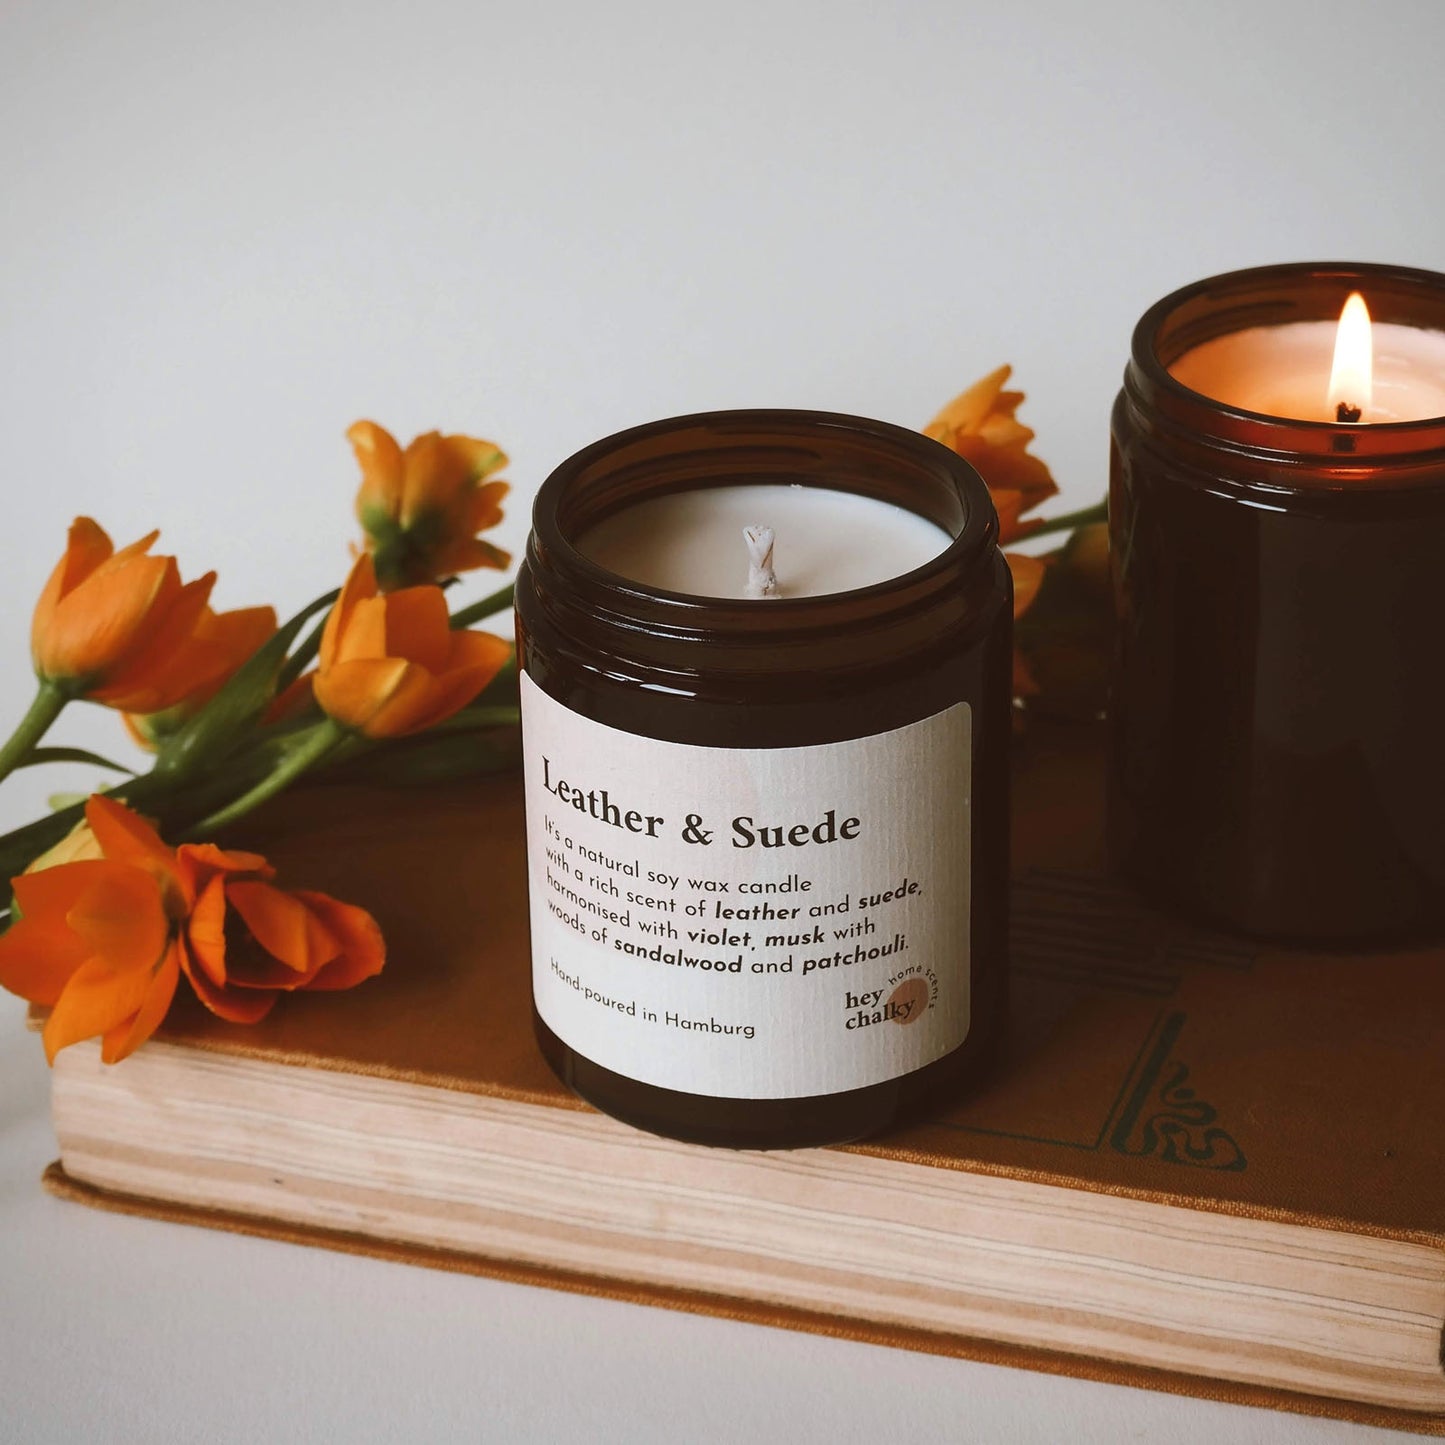 Hey Chalky Leather & Suede 155g Candle